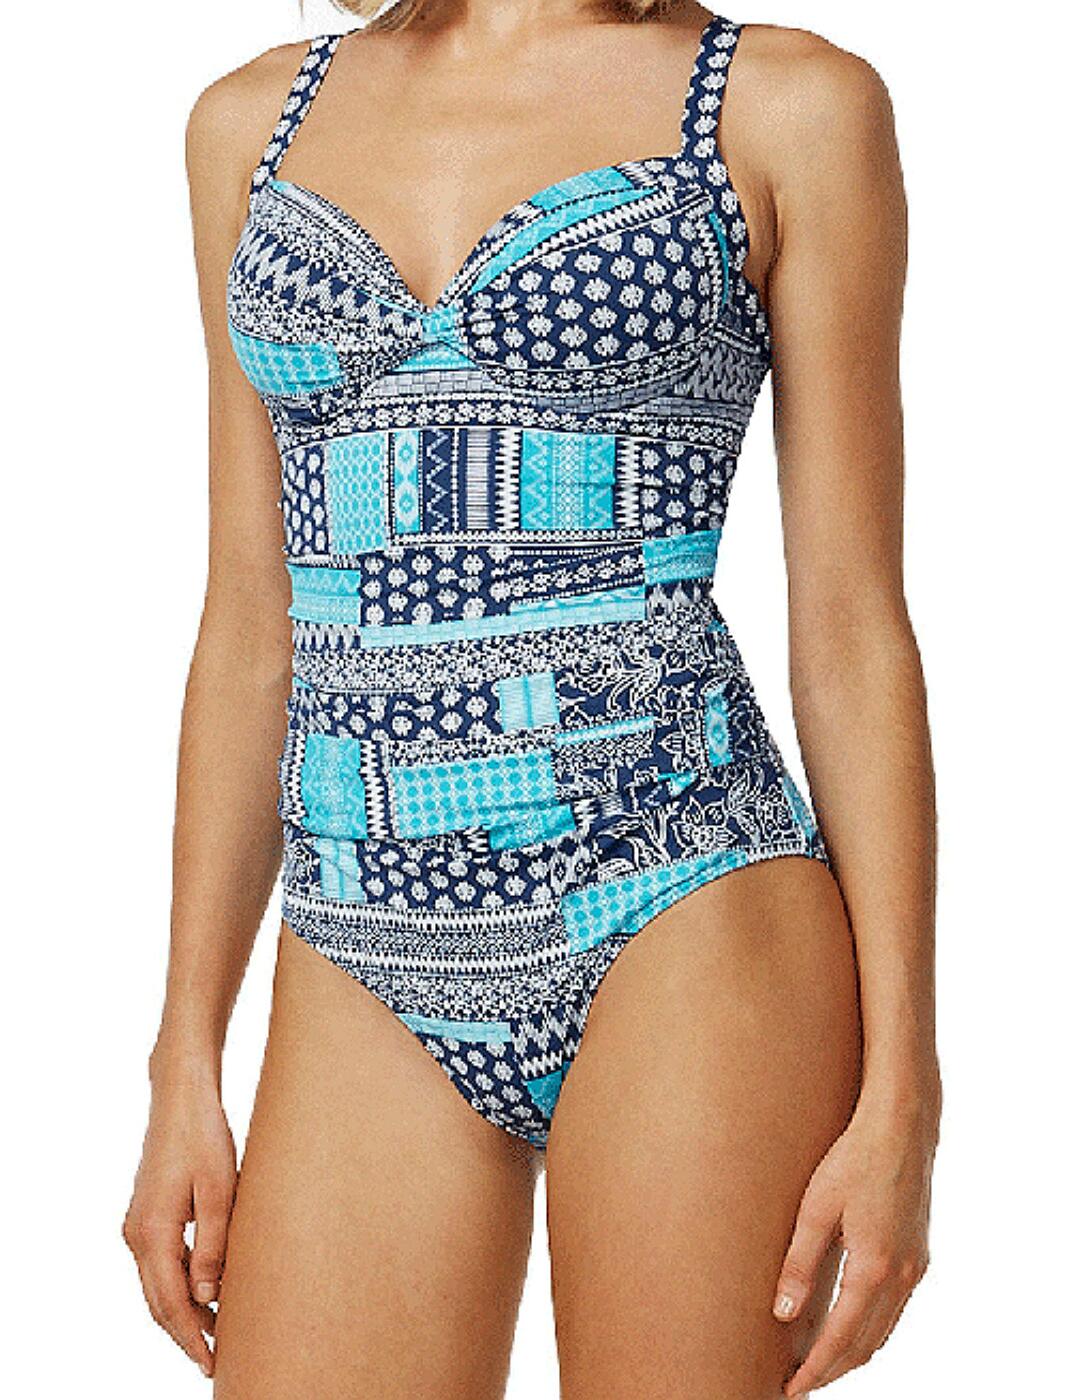 M4458PW Moontide Patchwork Underwired Cross Front Swimsuit - M4458PW Jean/Aqua